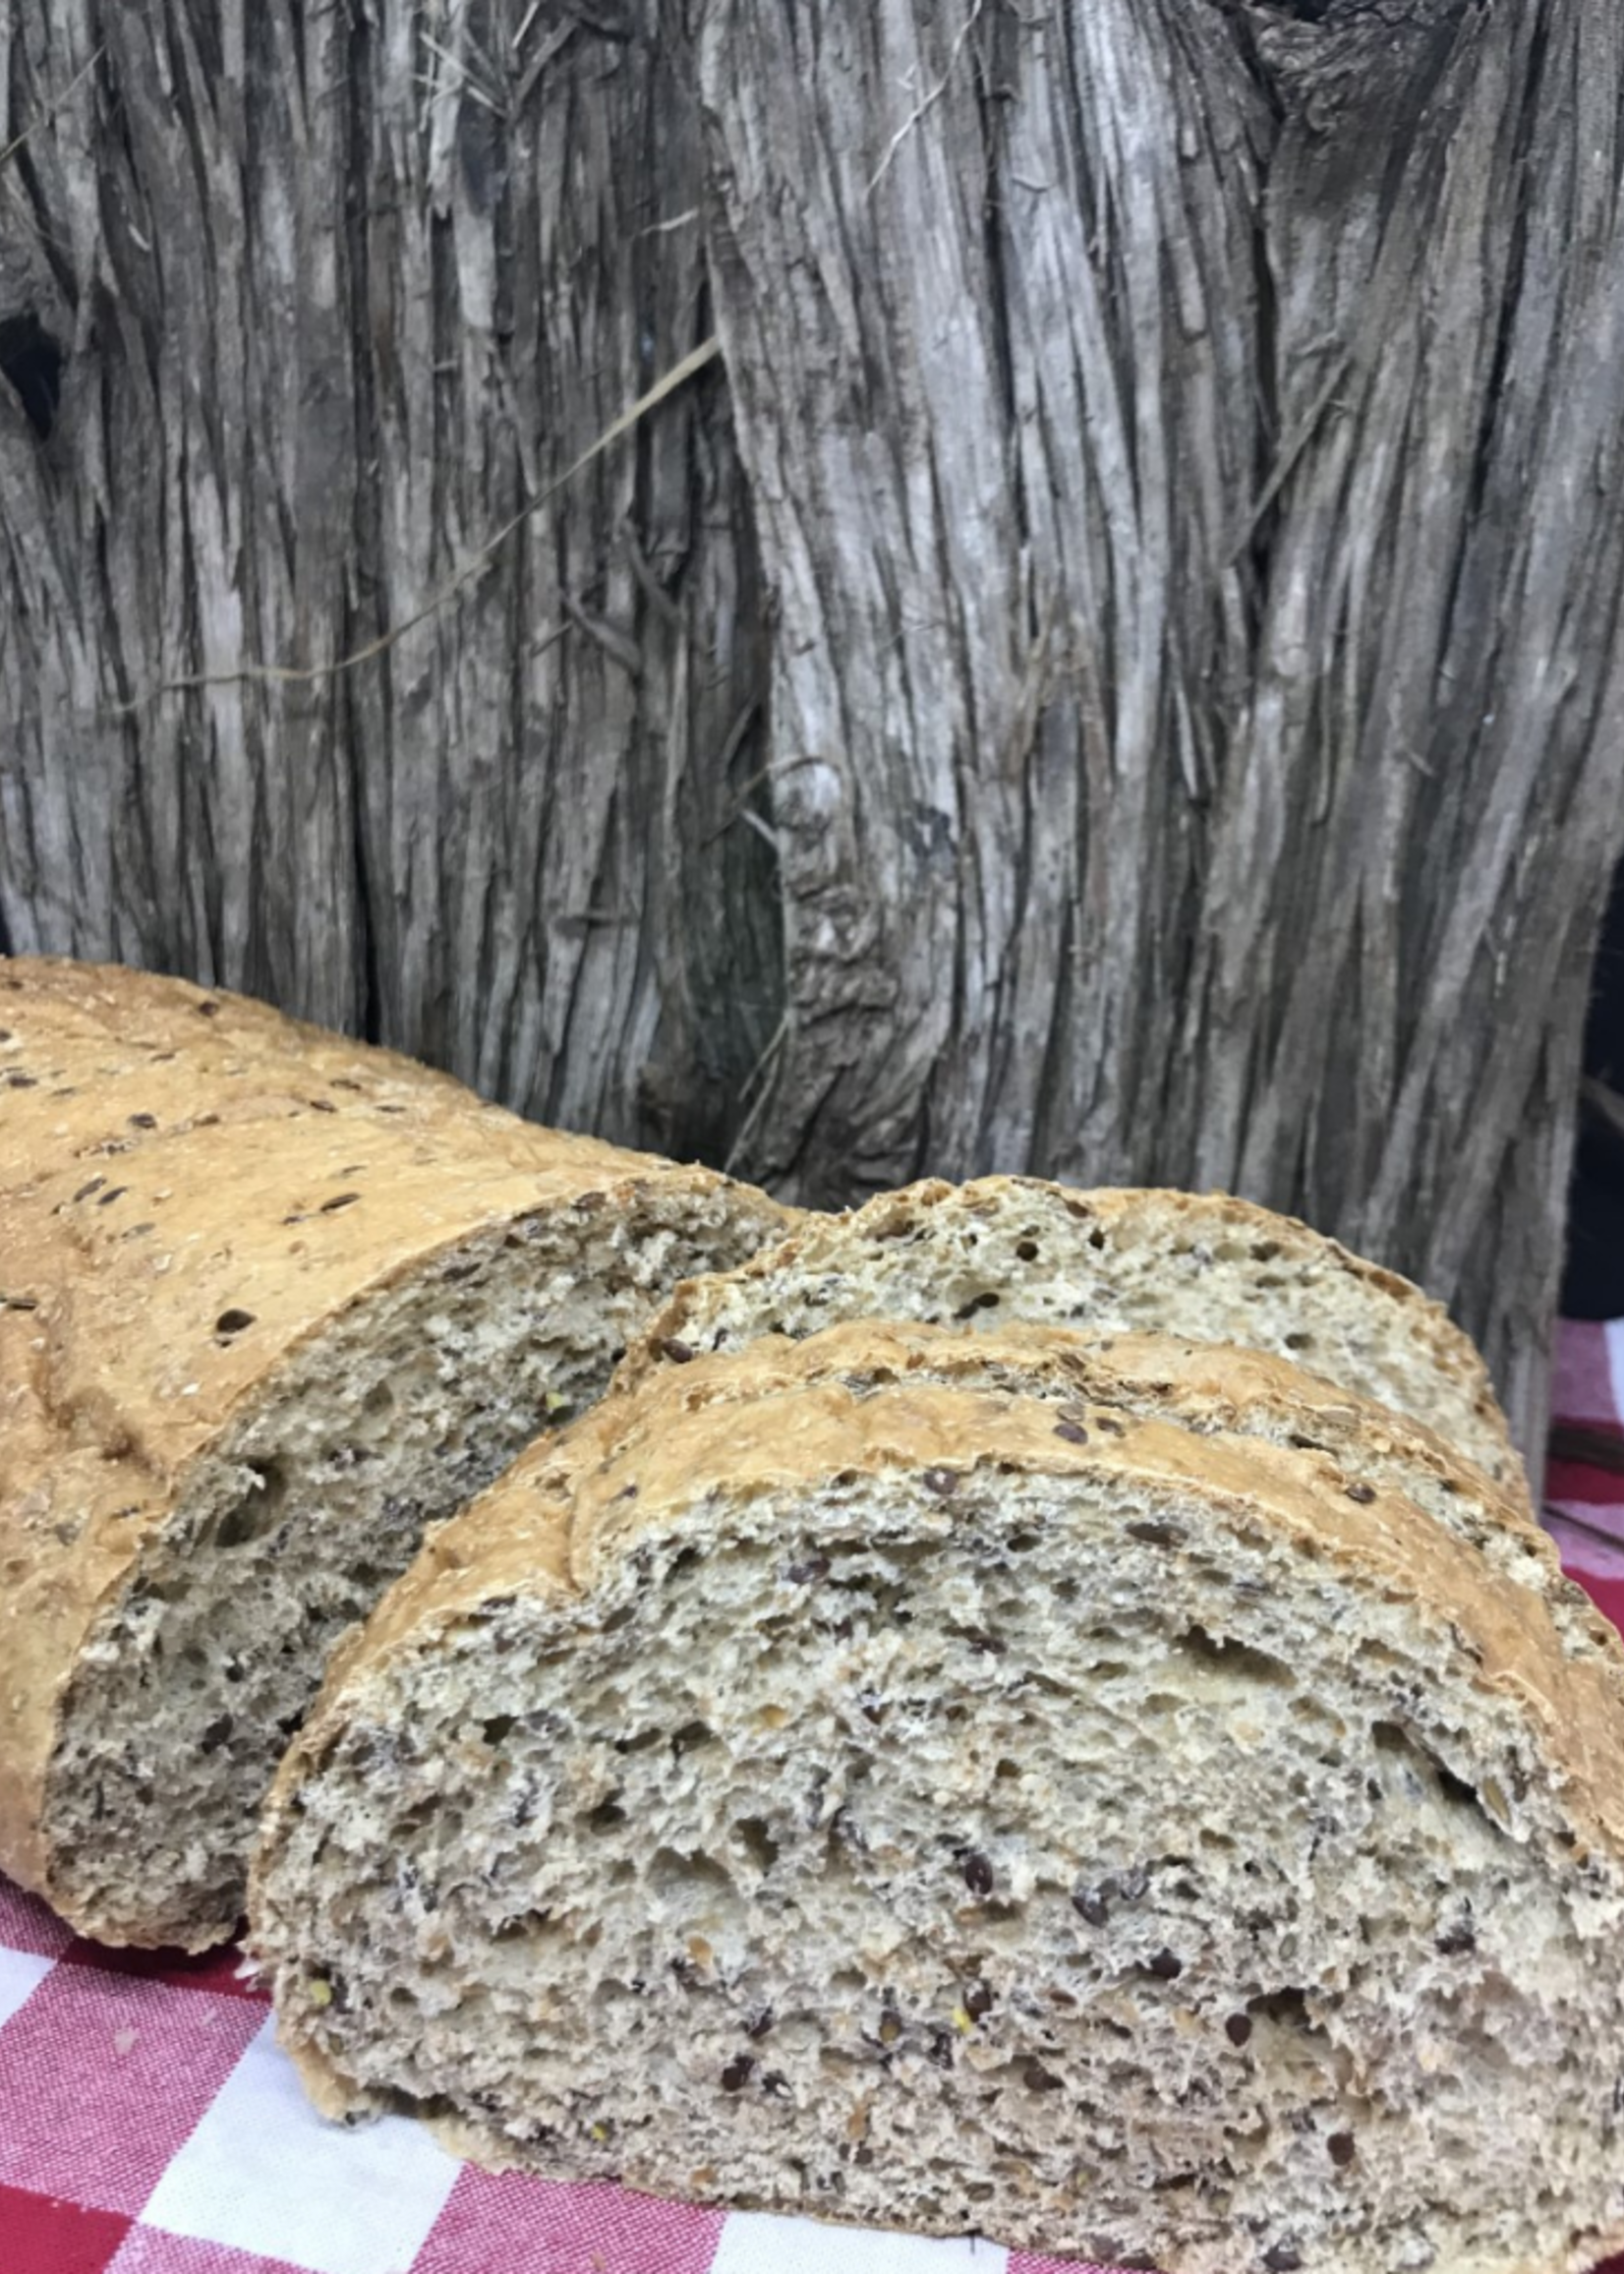 Campbell's Orchards Bread